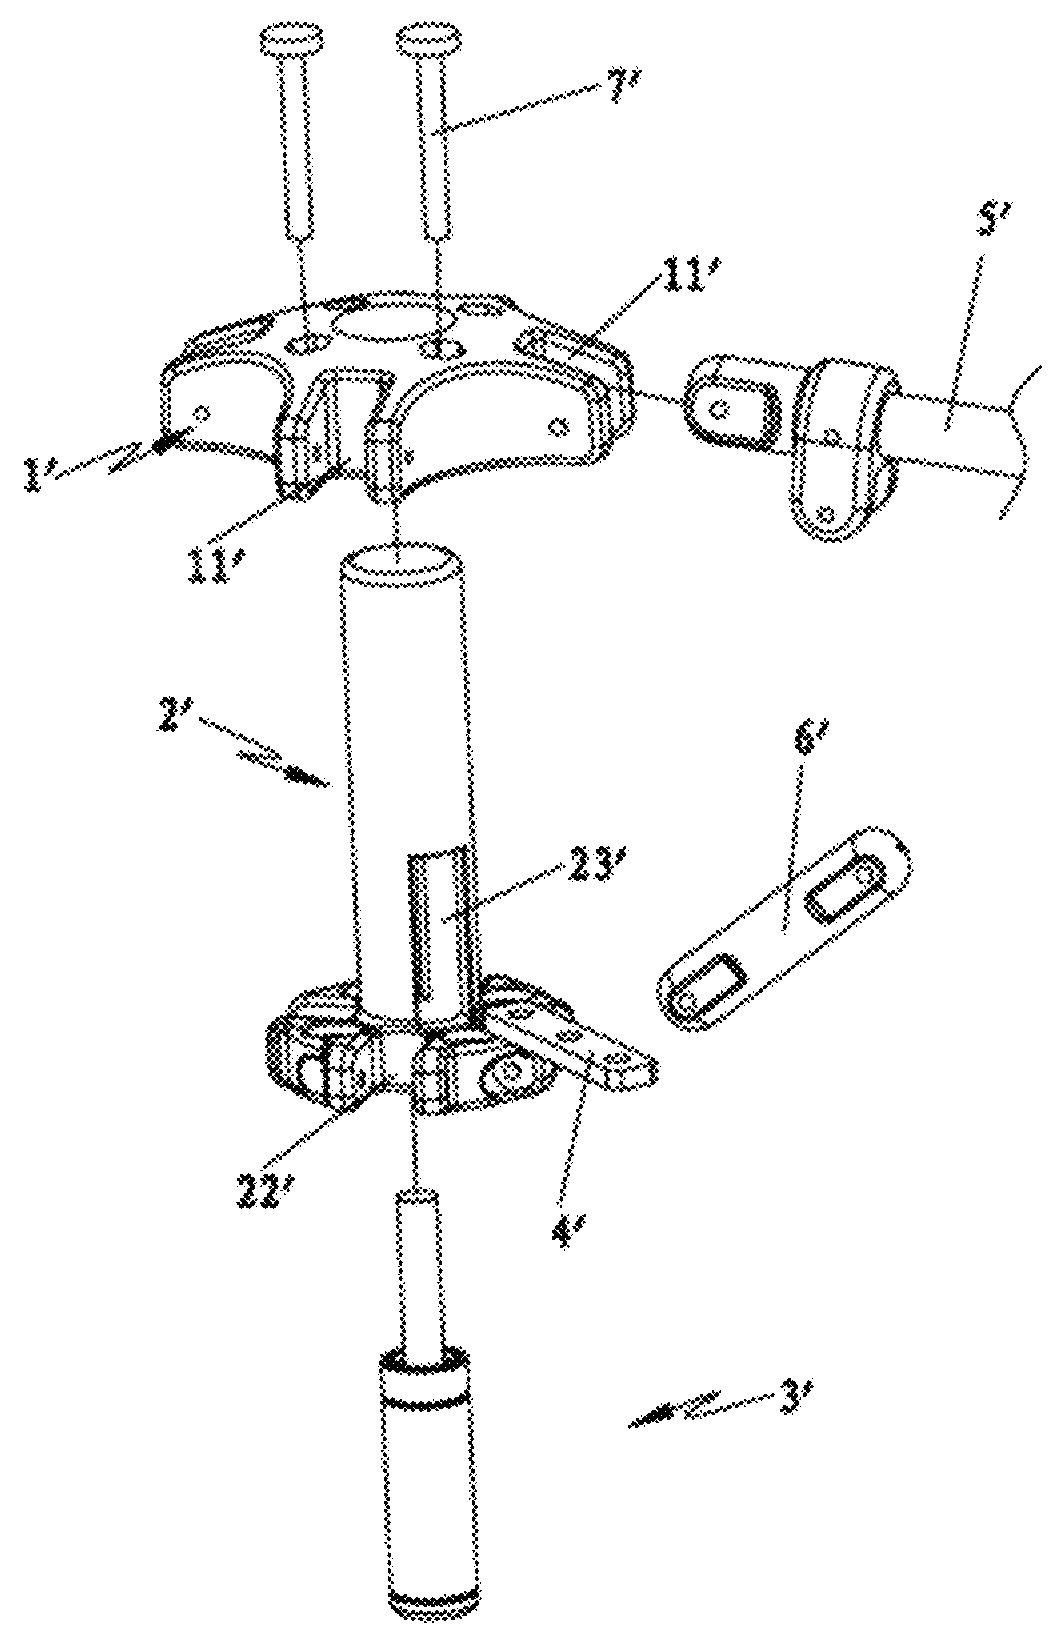 Mechanism for folding and unfolding a tent or awning